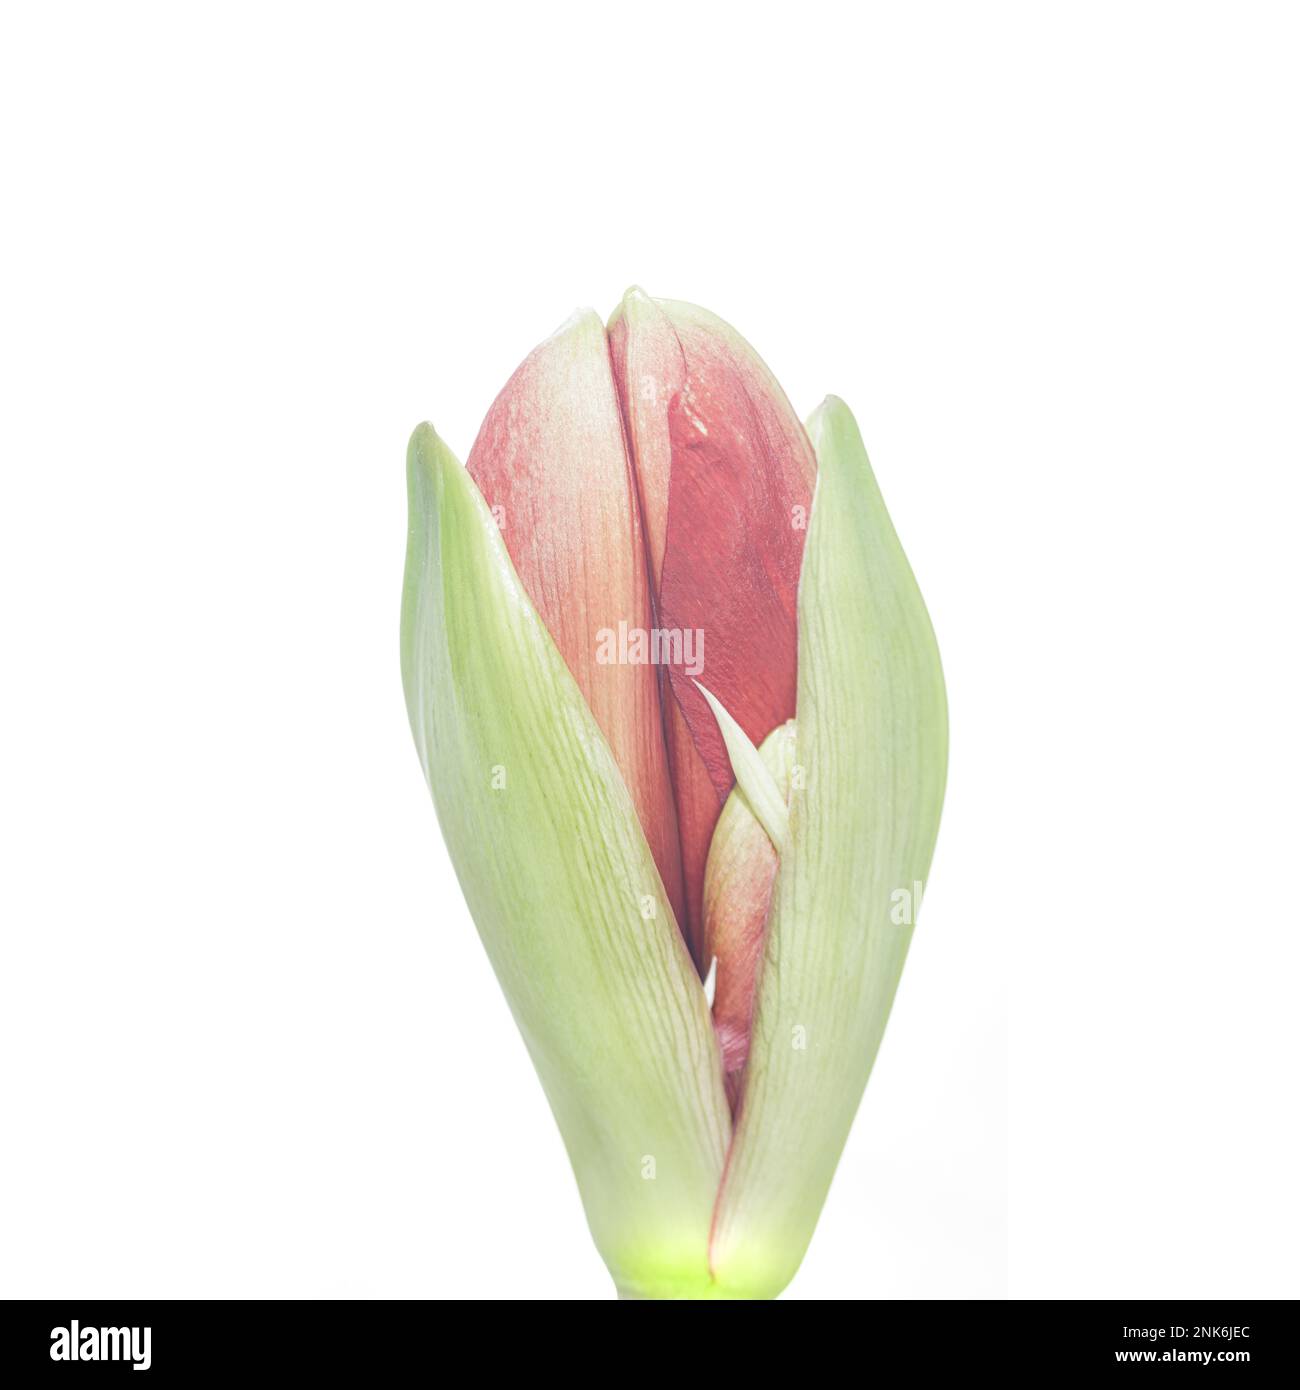 A square photo of a budding red amarillus flower against a white background Stock Photo